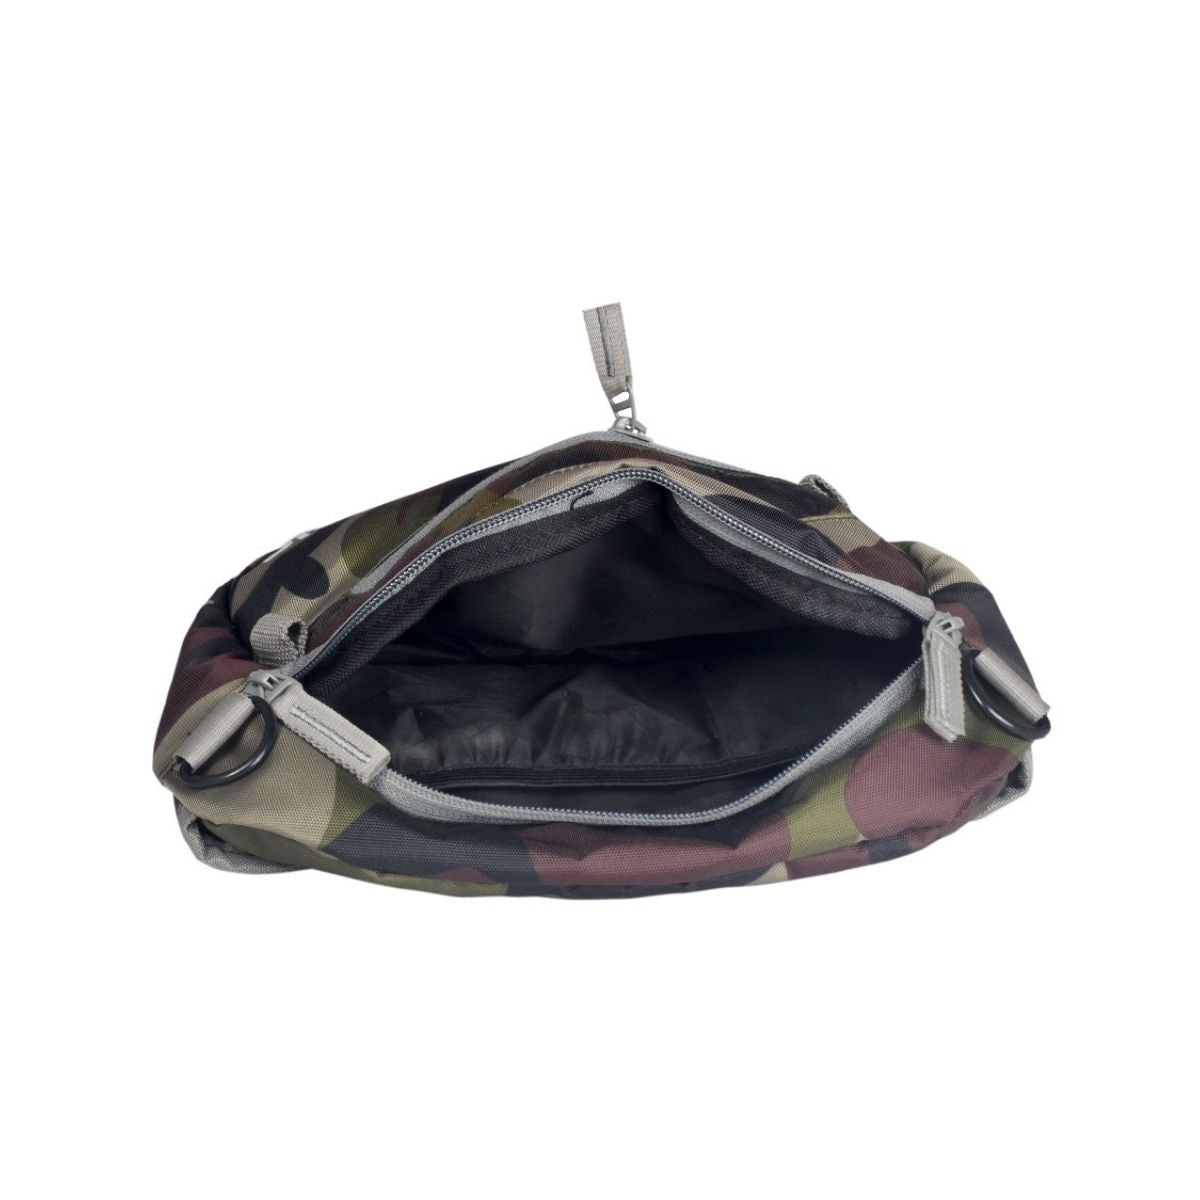 Multi-Functional Waist Pouch & Sling Bag 5